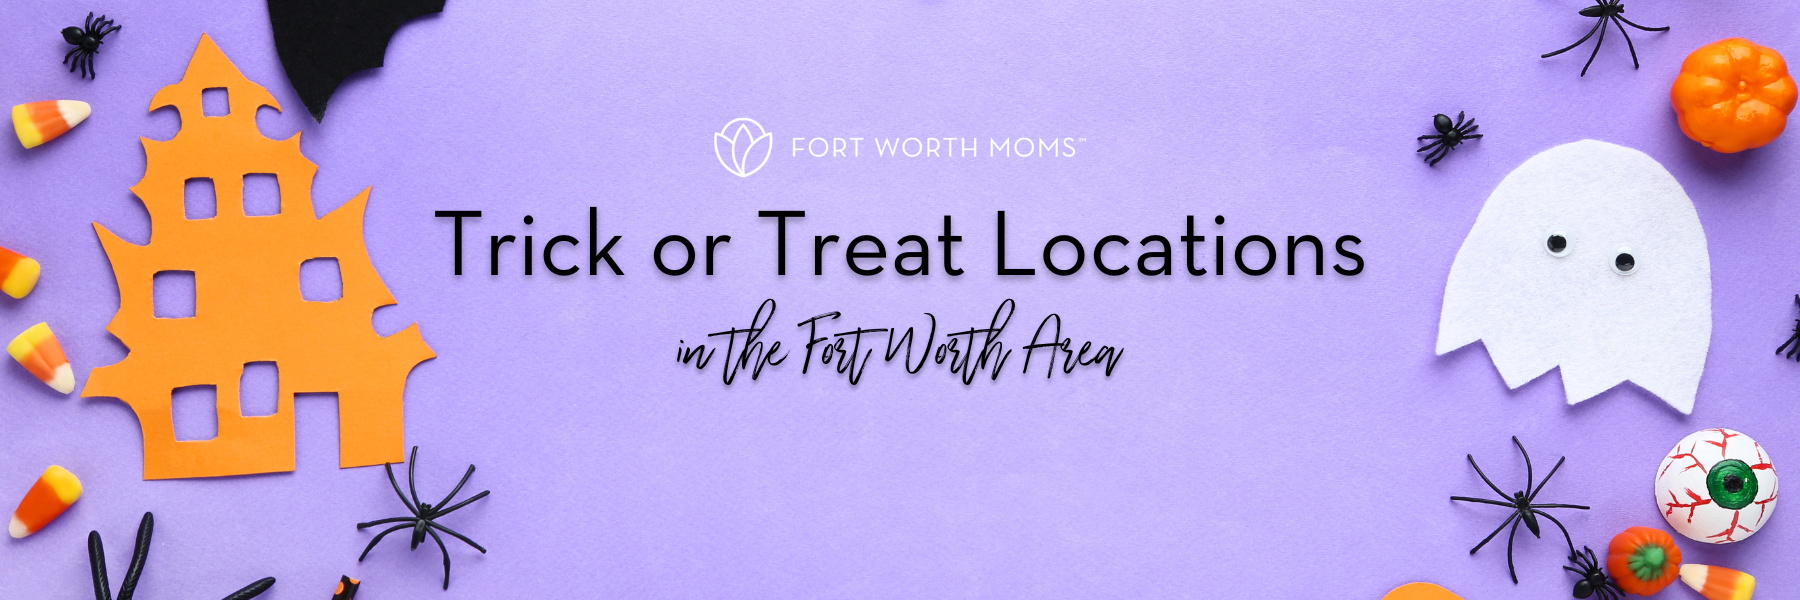 Find trick or treat locations in Fort Worth.